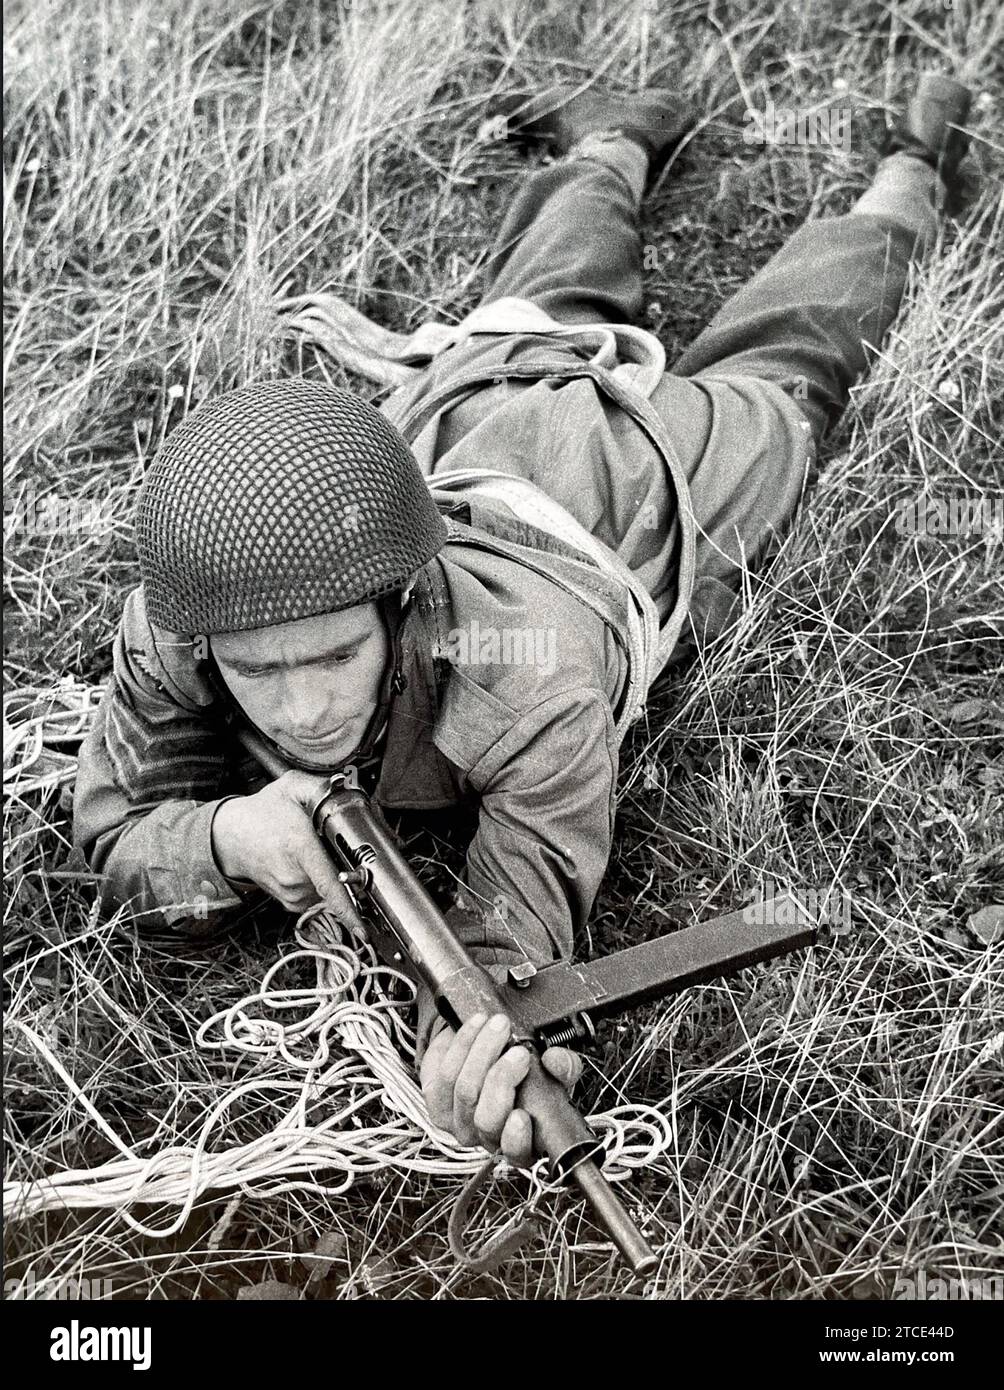 AIRBORNE FORCES  British paratrooper poses with Sten gun about 1943 Stock Photo